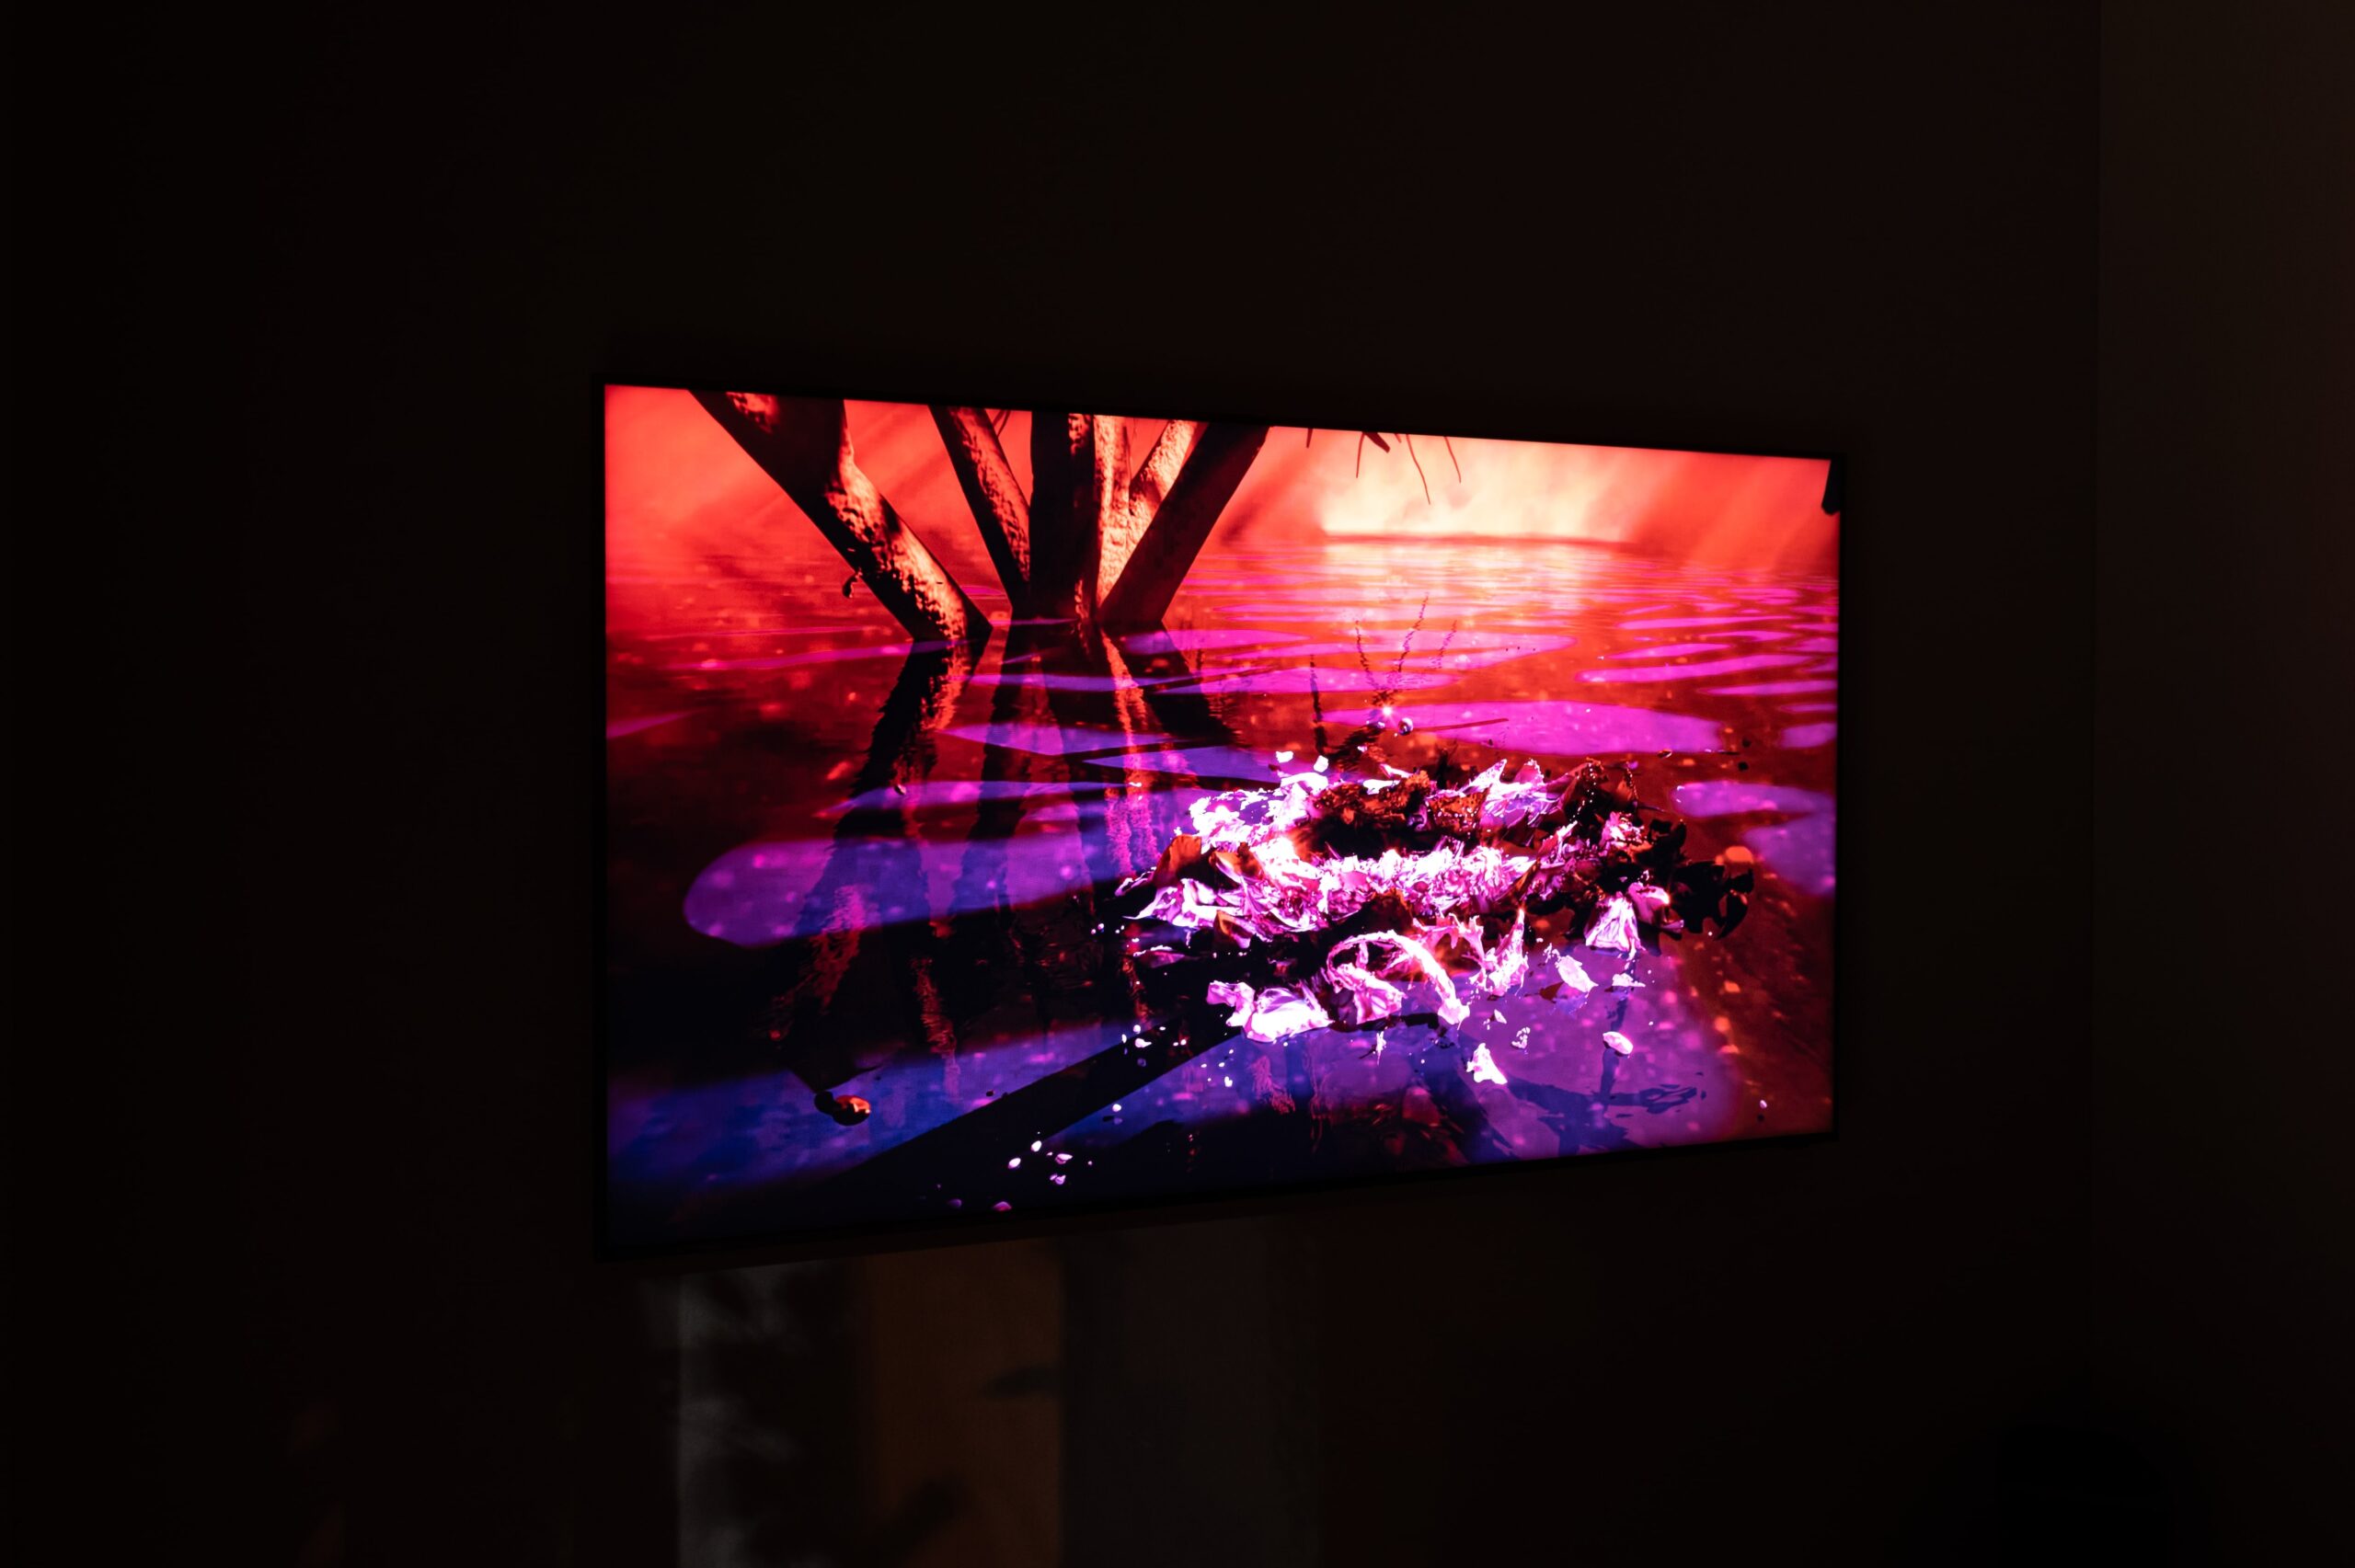 A photo of a projected semi-abstract image with red and purple colors in a pitch-black room